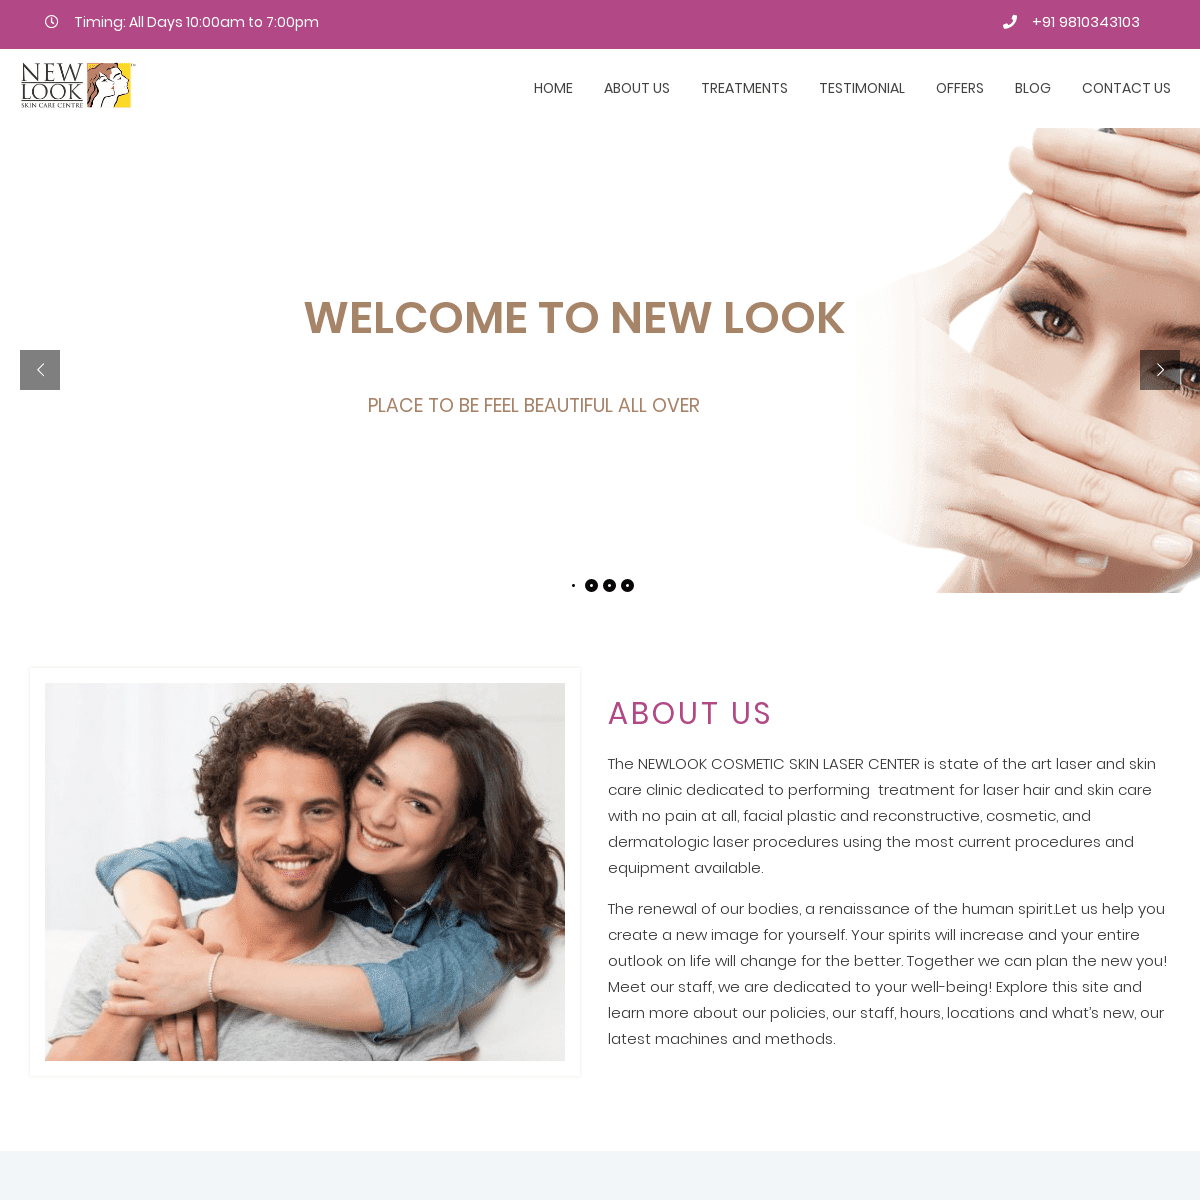 A complete backup of newlooklaserclinic.com